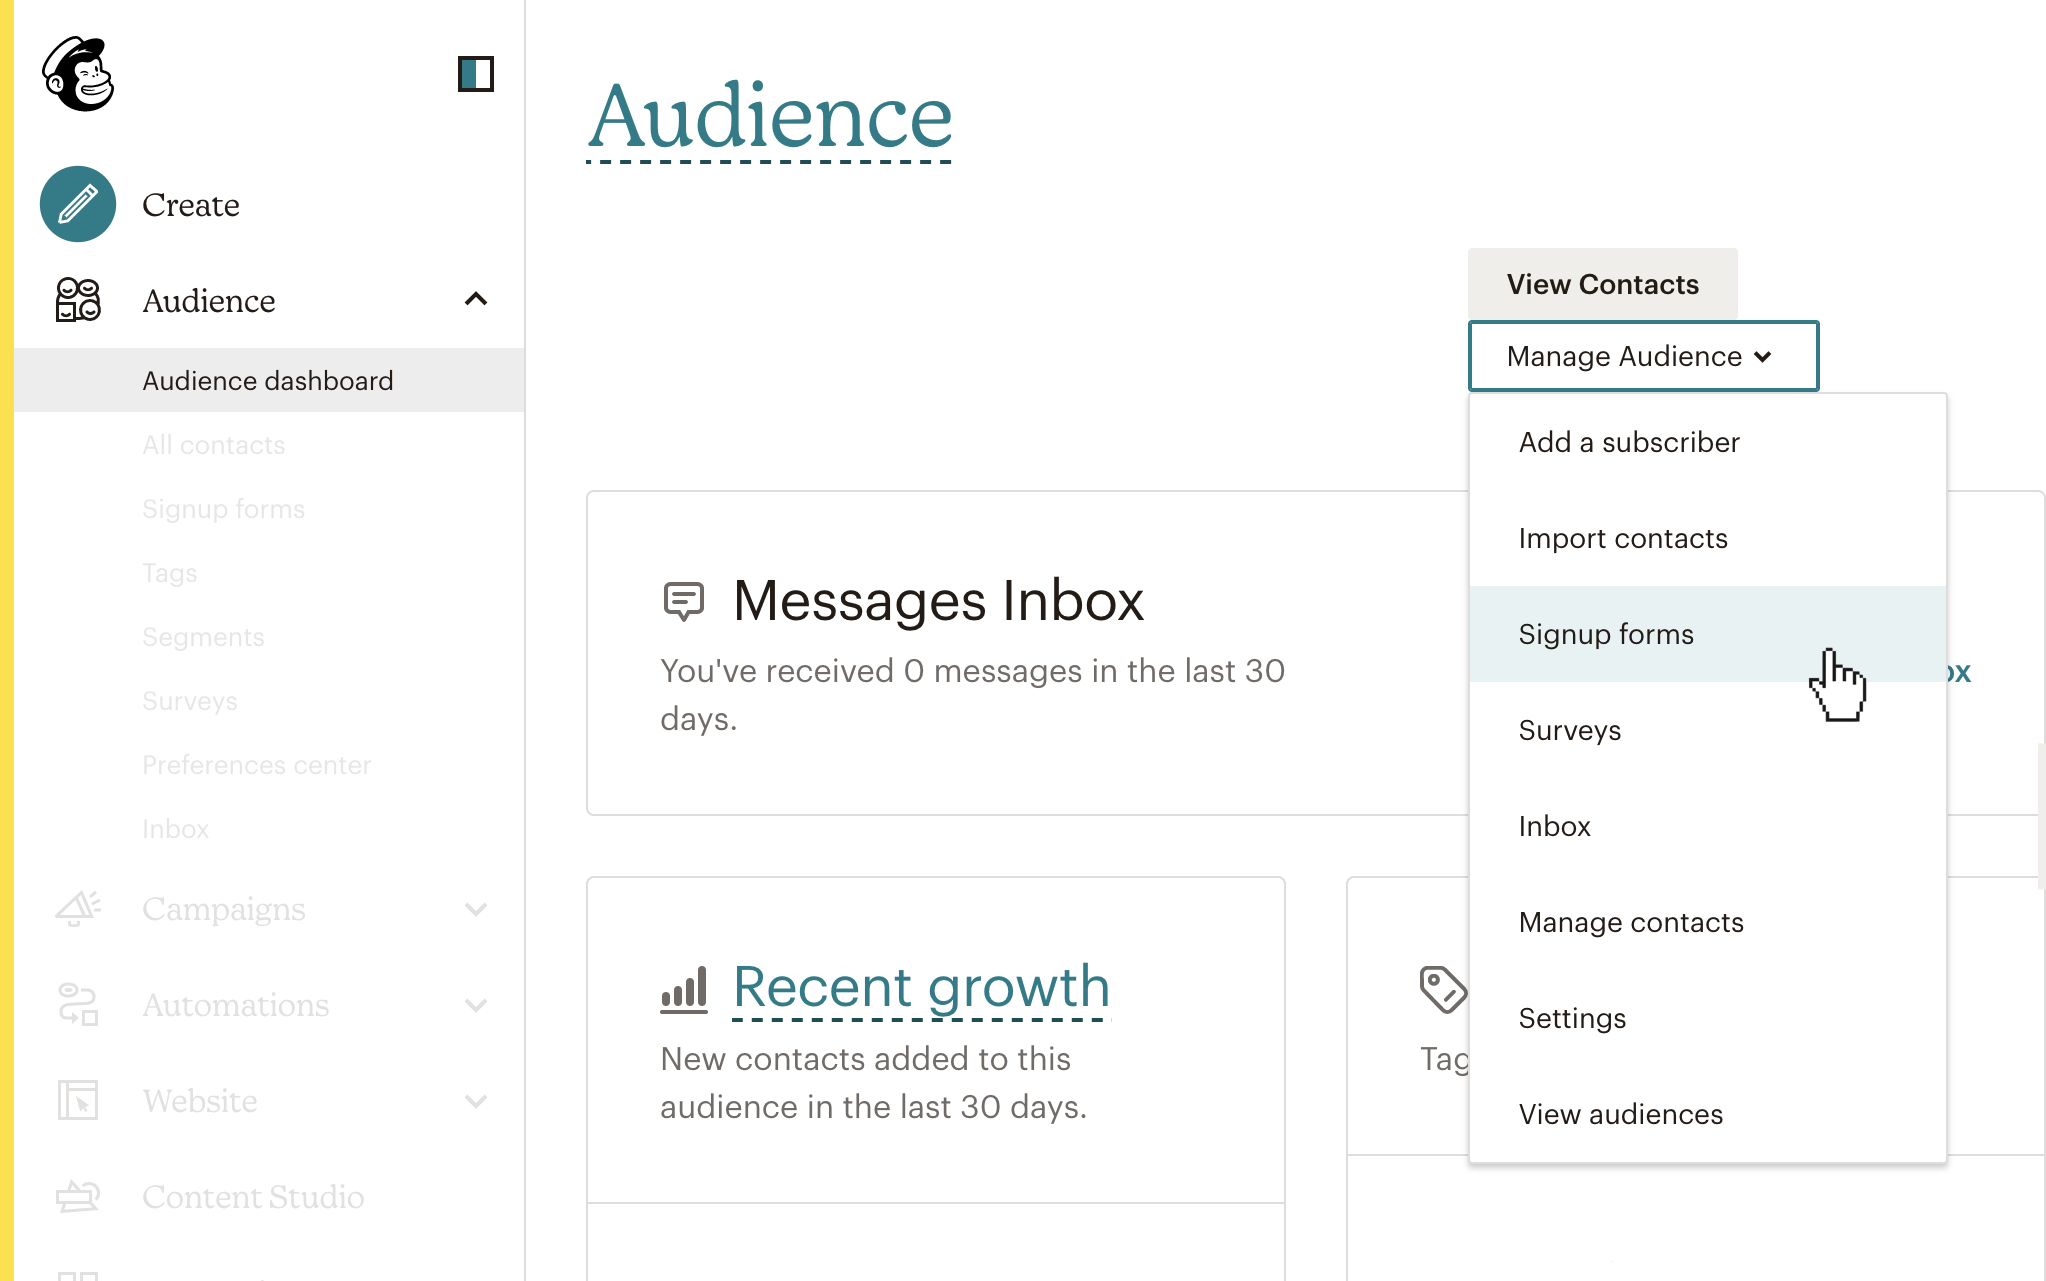 select_signup_forms_from_mailchimp_audience_admin.png